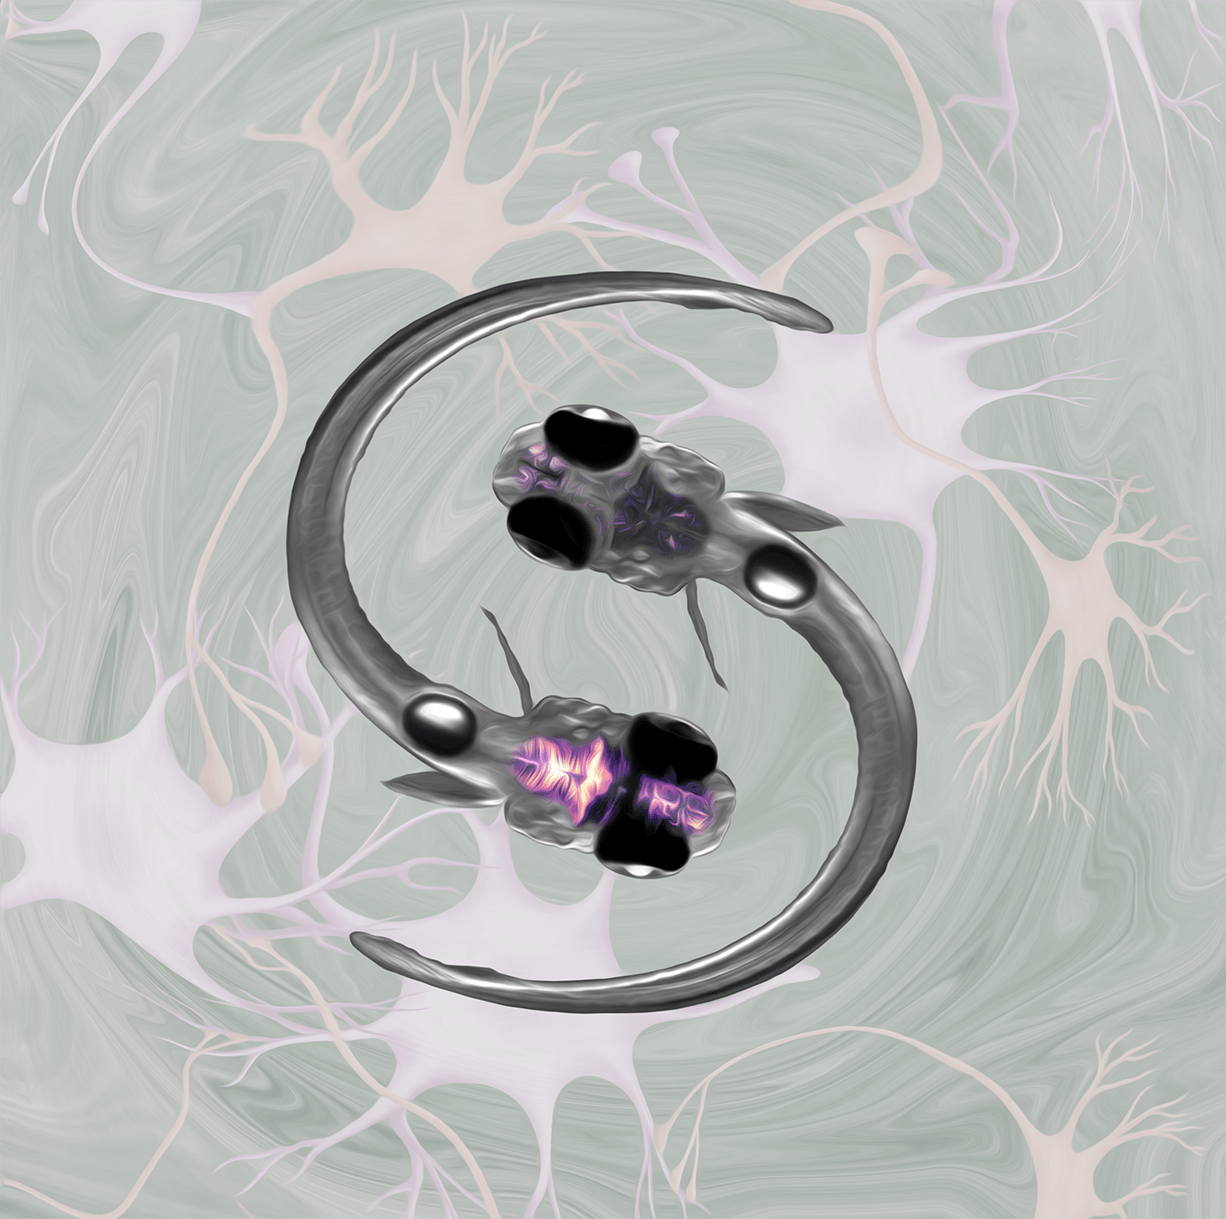 Illustration of zebrafish swimming in the space made of the neurons and astrocytes